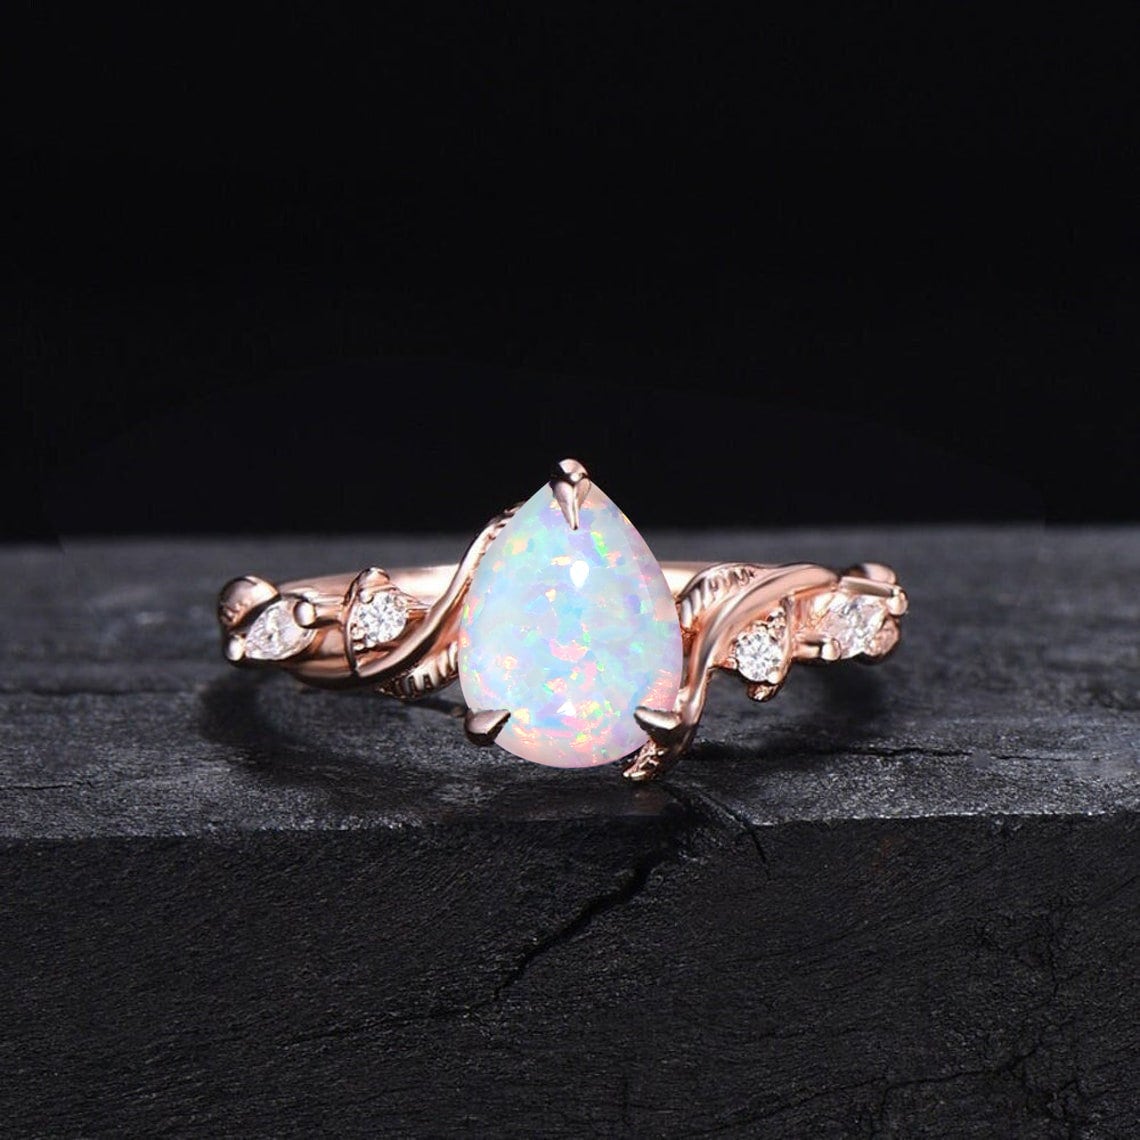 Twist Leaf Moissanite Opal Wedding Ring Set Nature Inspired White Opal Ring Set Vintage 1.25ct Pear Shaped Branch Twig Opal Engagement Ring